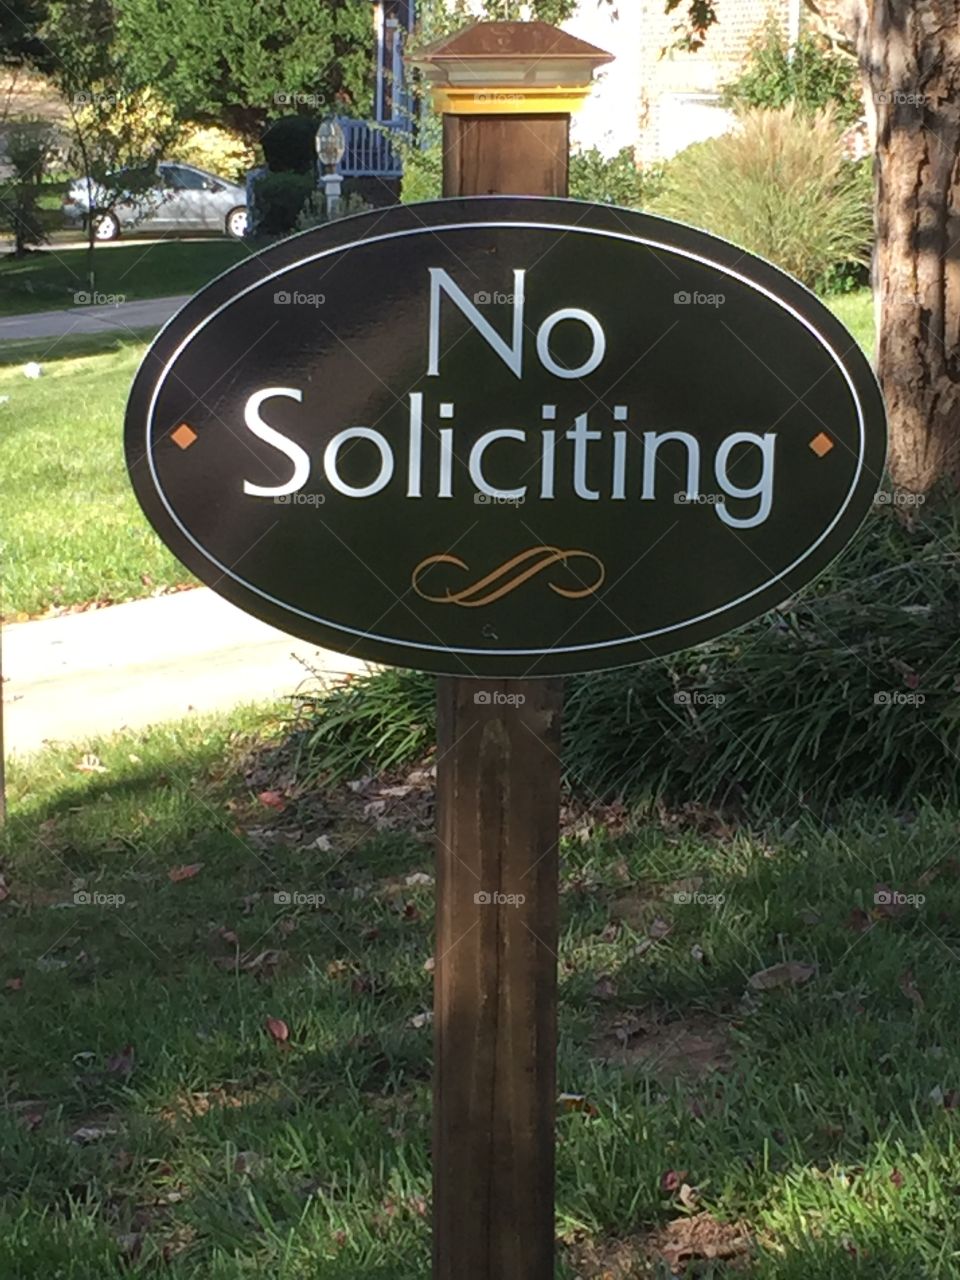 No Soliciting. Can you believe they want to keep us good guys out? Ha!